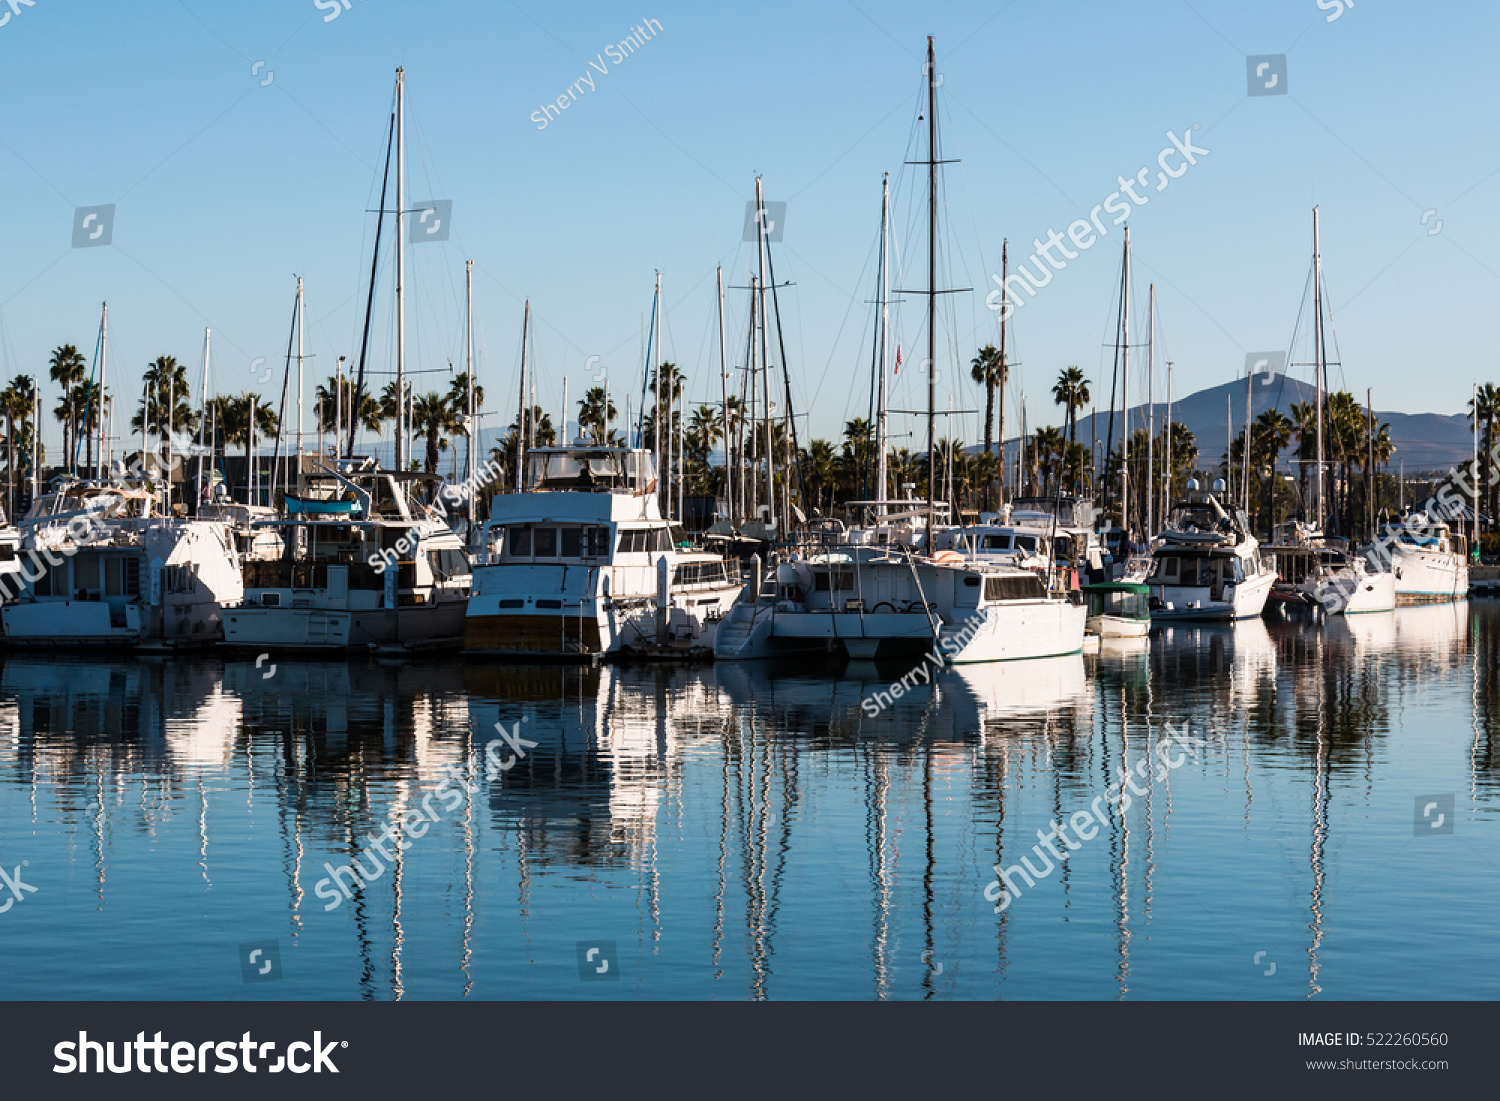 Boats moored in bay at the Chula Vista Bayfront park with mountain peak in the background. #522260560